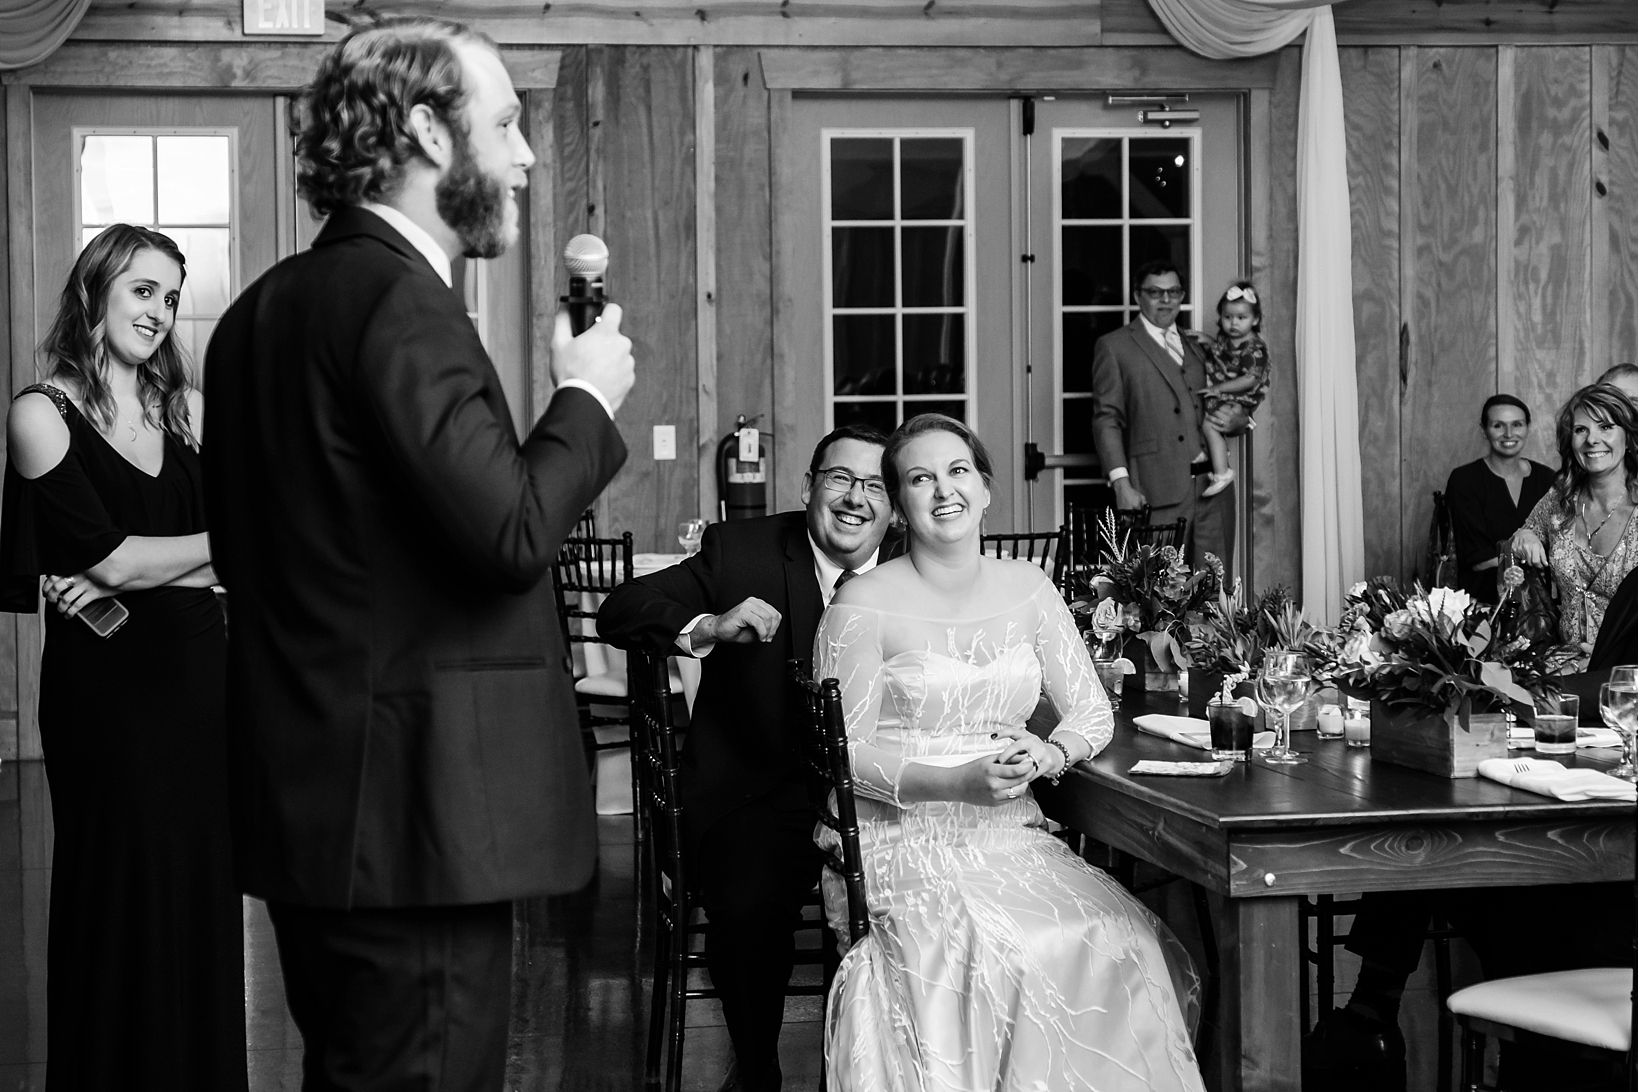 The wedding couple laugh as their friends give speeches to the reception hall